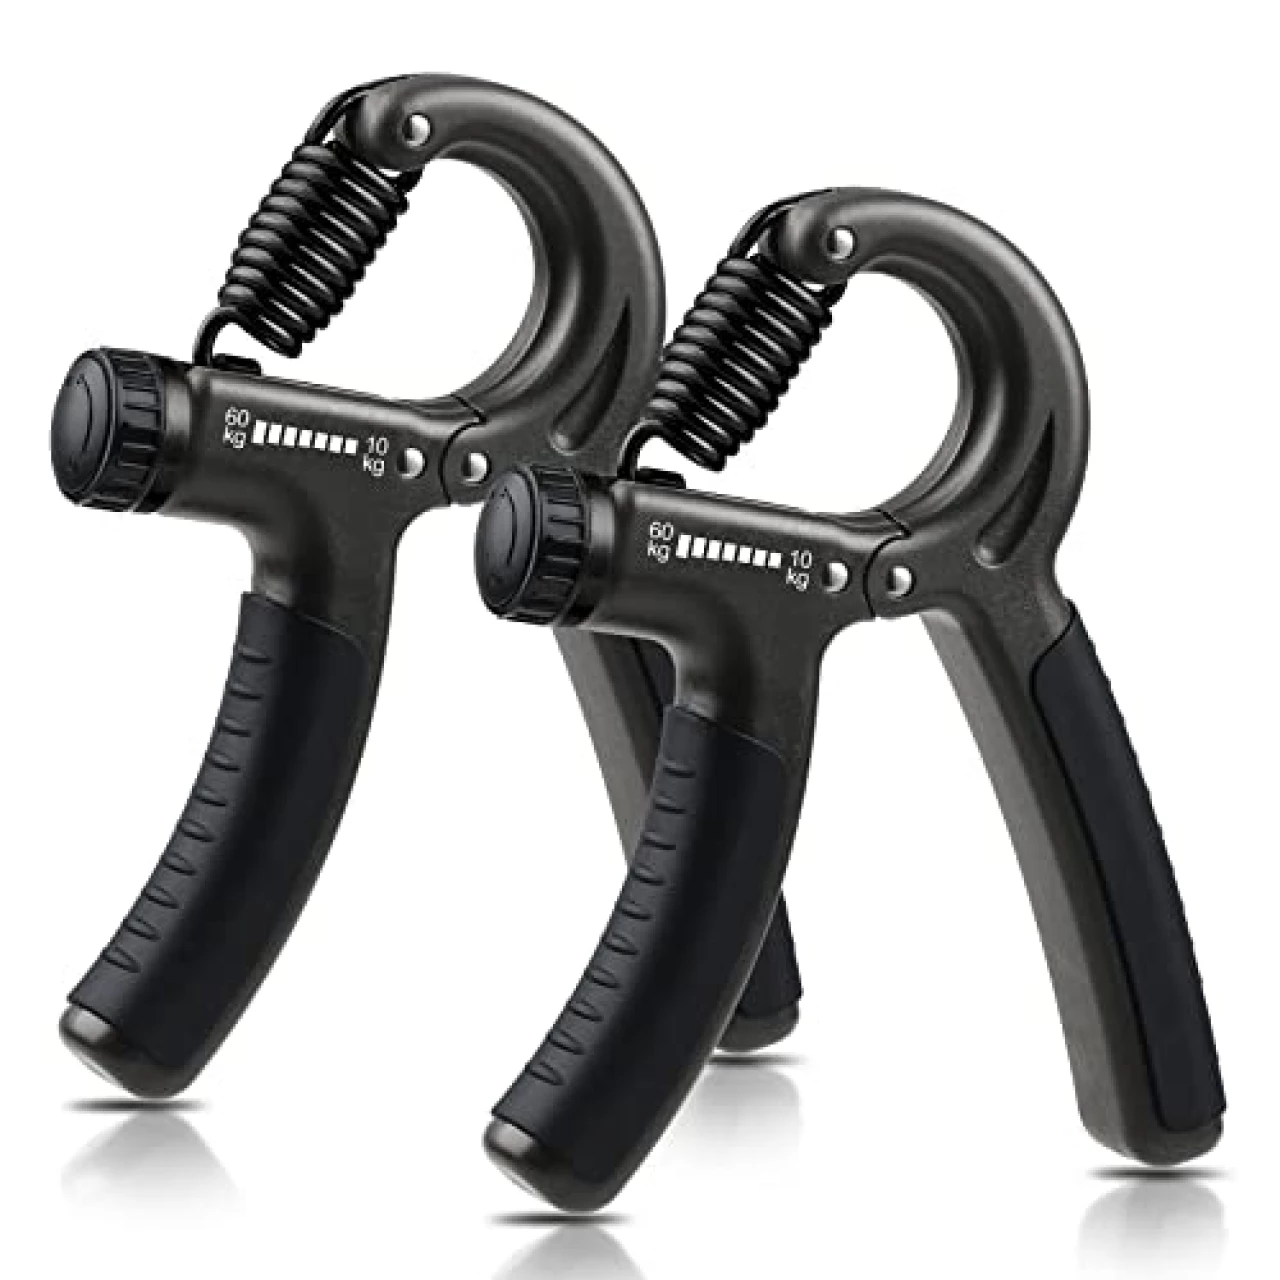 NIYIKOW 2 Pack Grip Strength Trainer, Hand Grip Strengthener, Adjustable Resistance 22-132Lbs (10-60kg), Non-Slip Gripper, Perfect for Musicians Athletes and Hand Injury Recovery